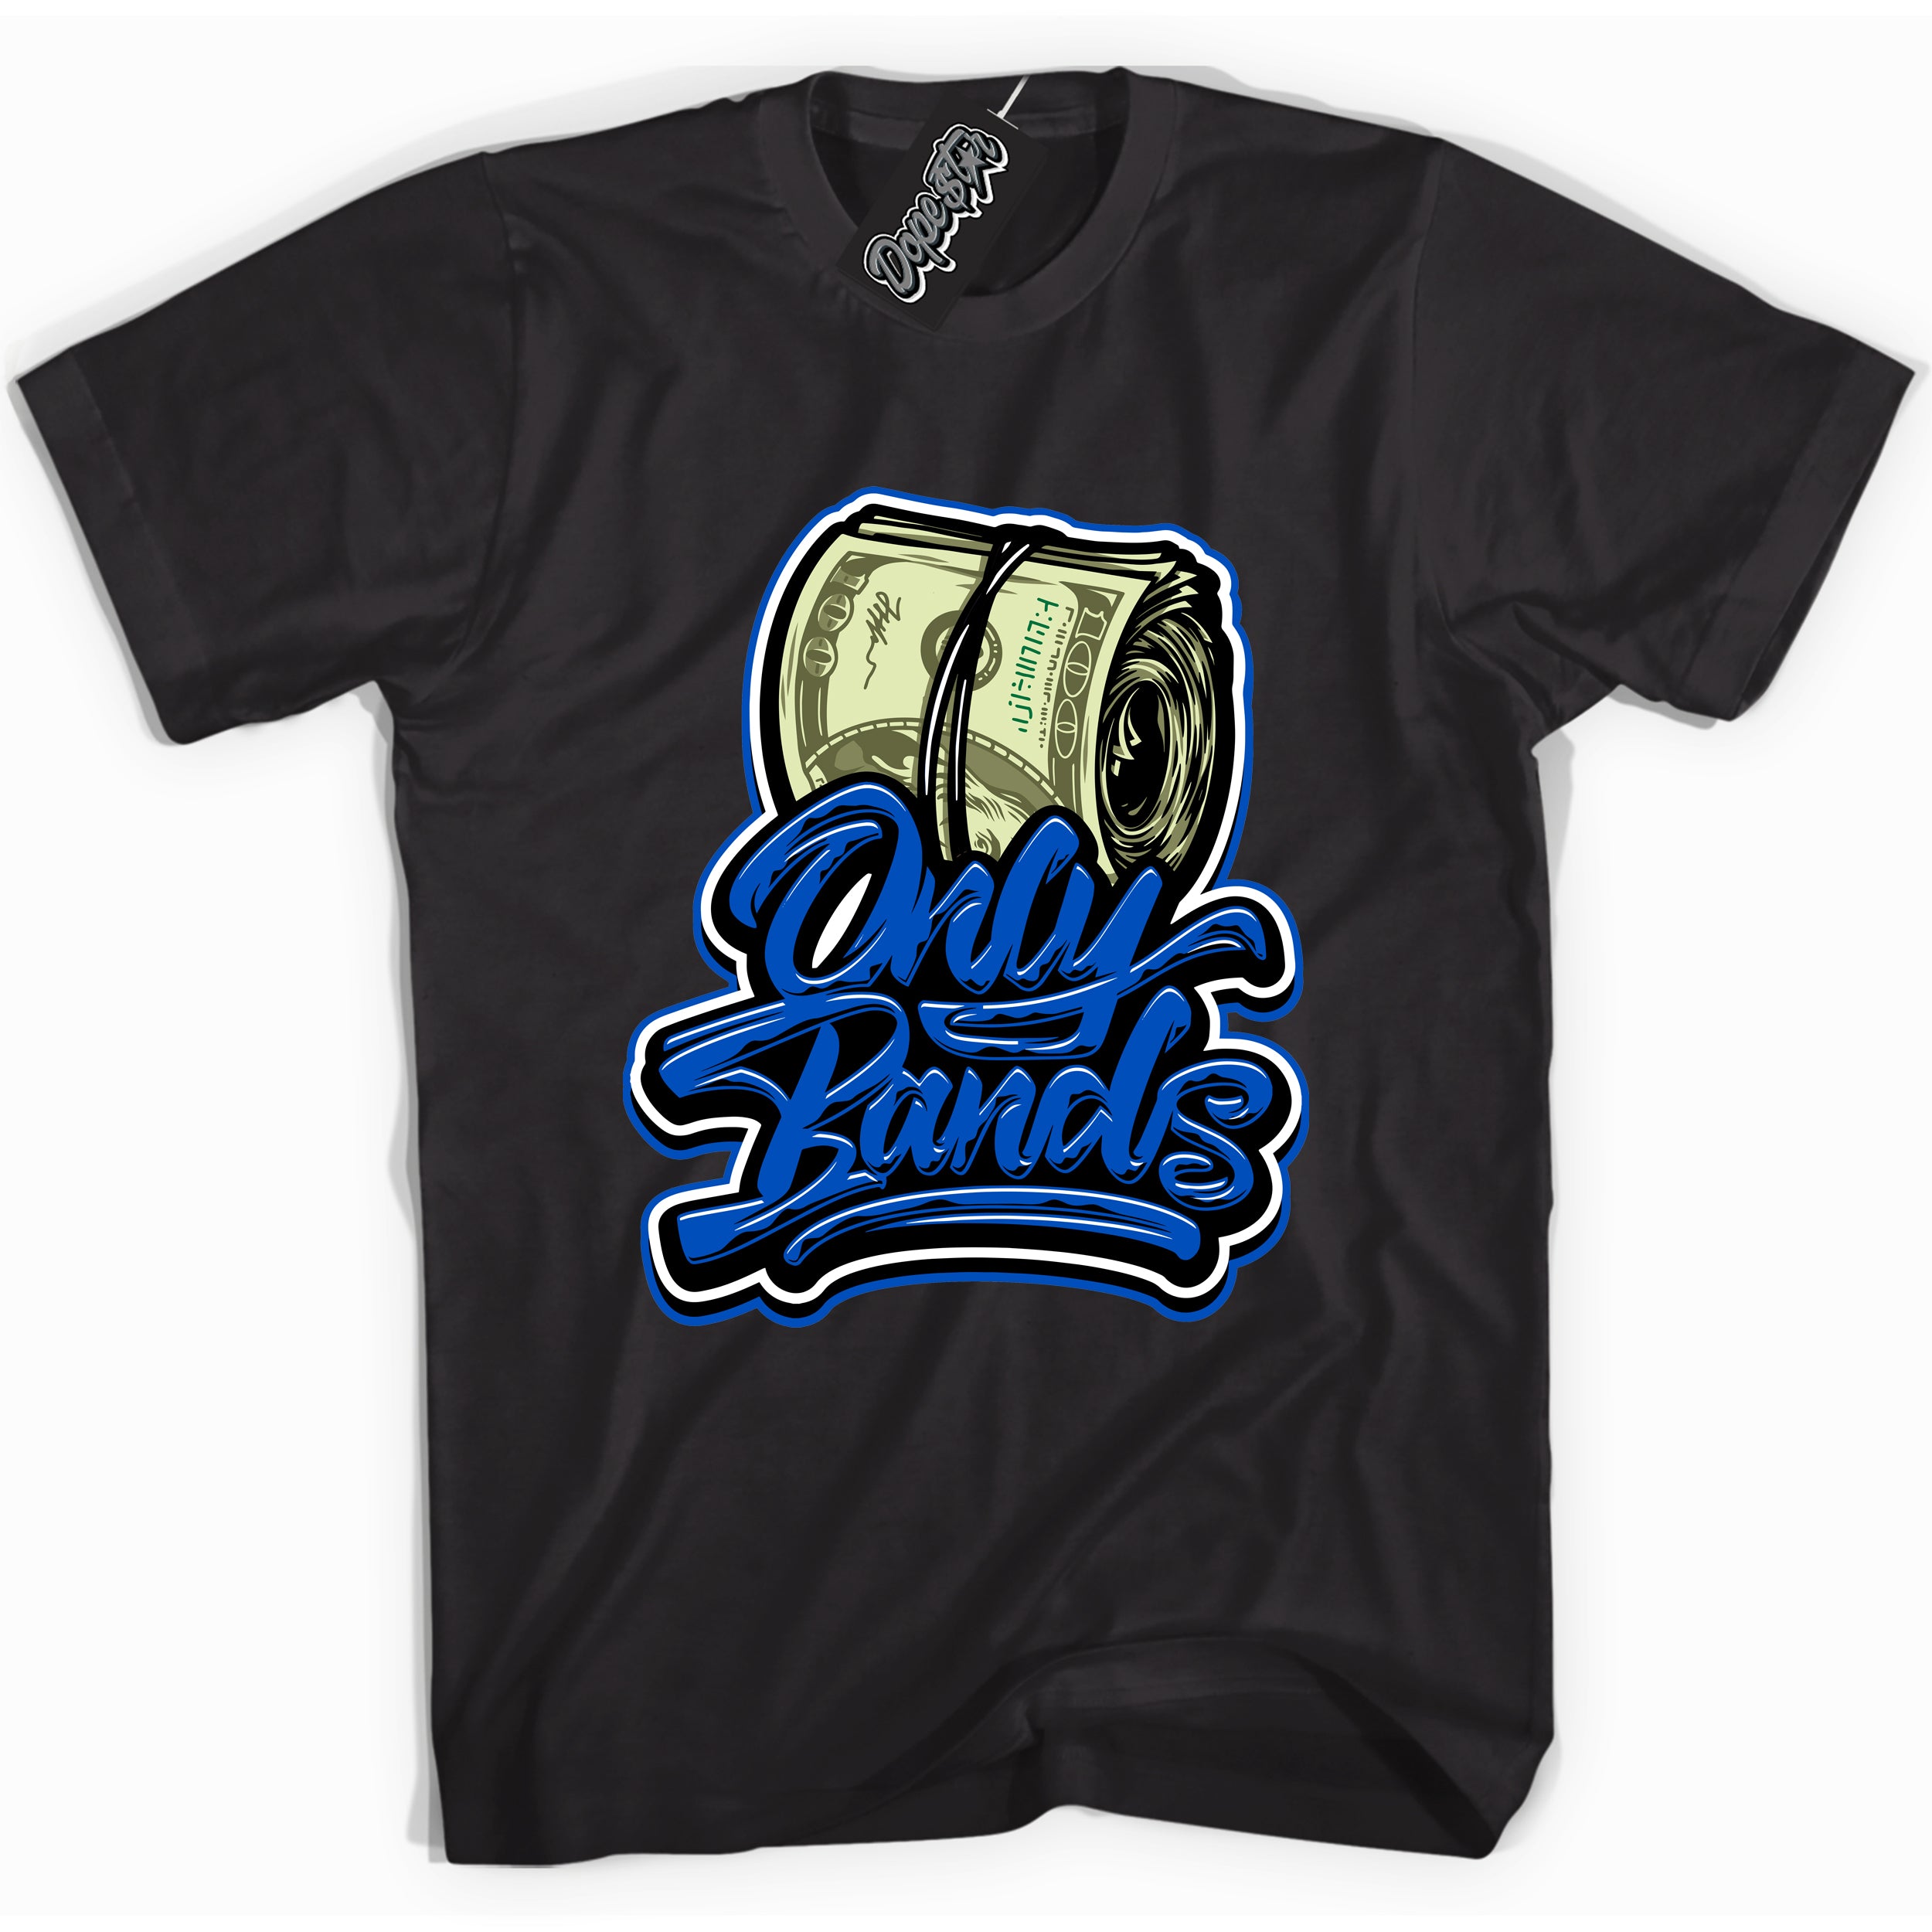 Cool Black graphic tee with "Only Bands" design, that perfectly matches Royal Reimagined 1s sneakers 